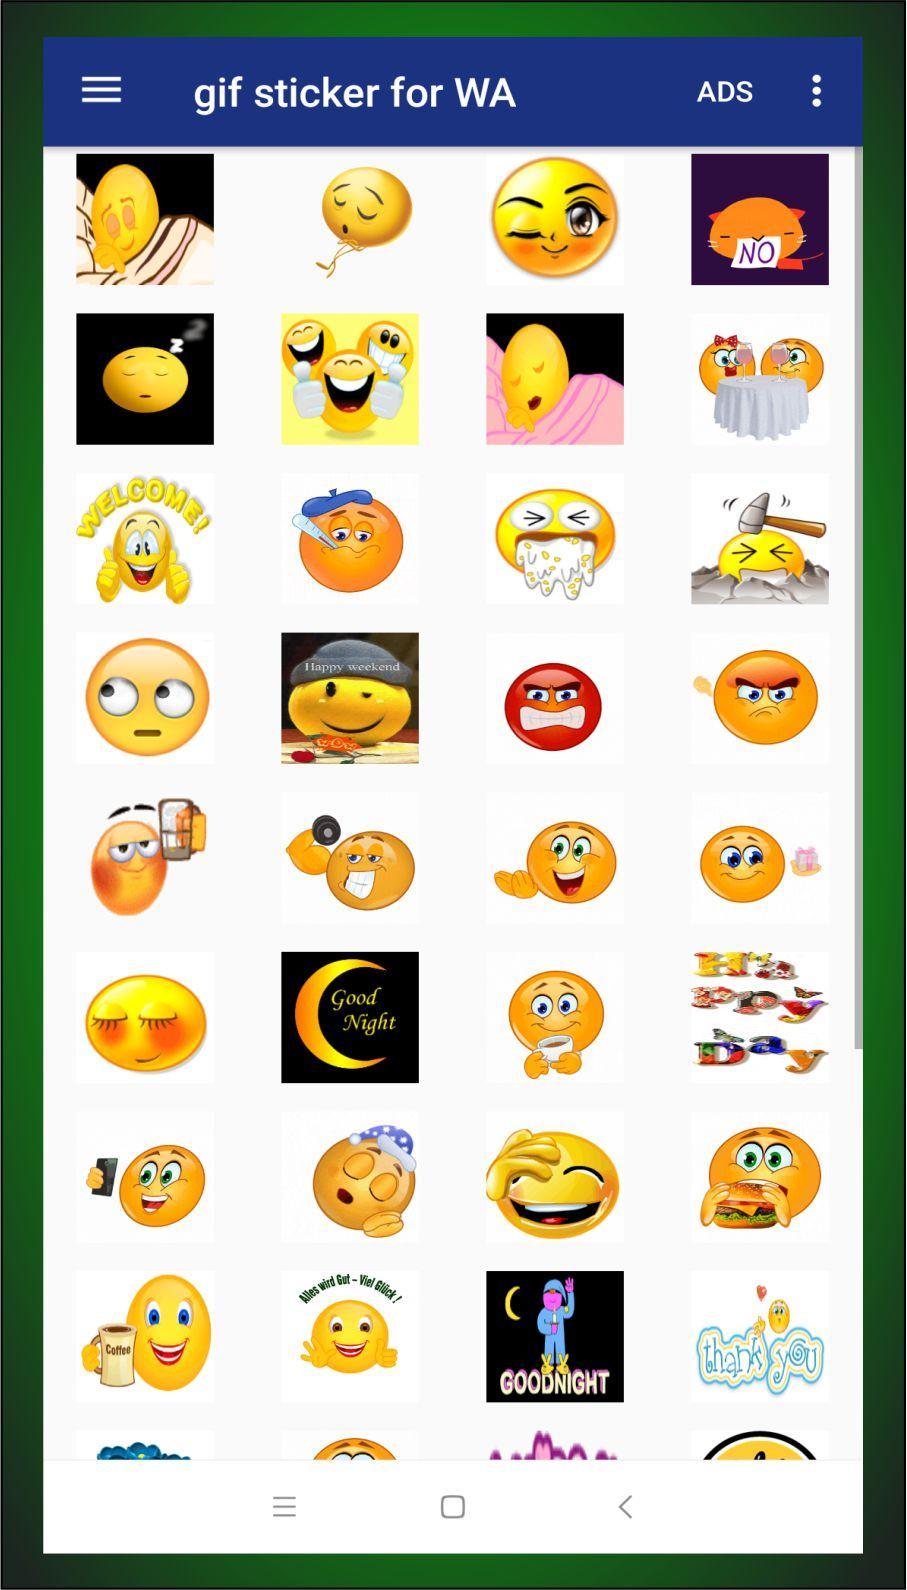 Sticker Gif For Wa 2019 For Android Apk Download